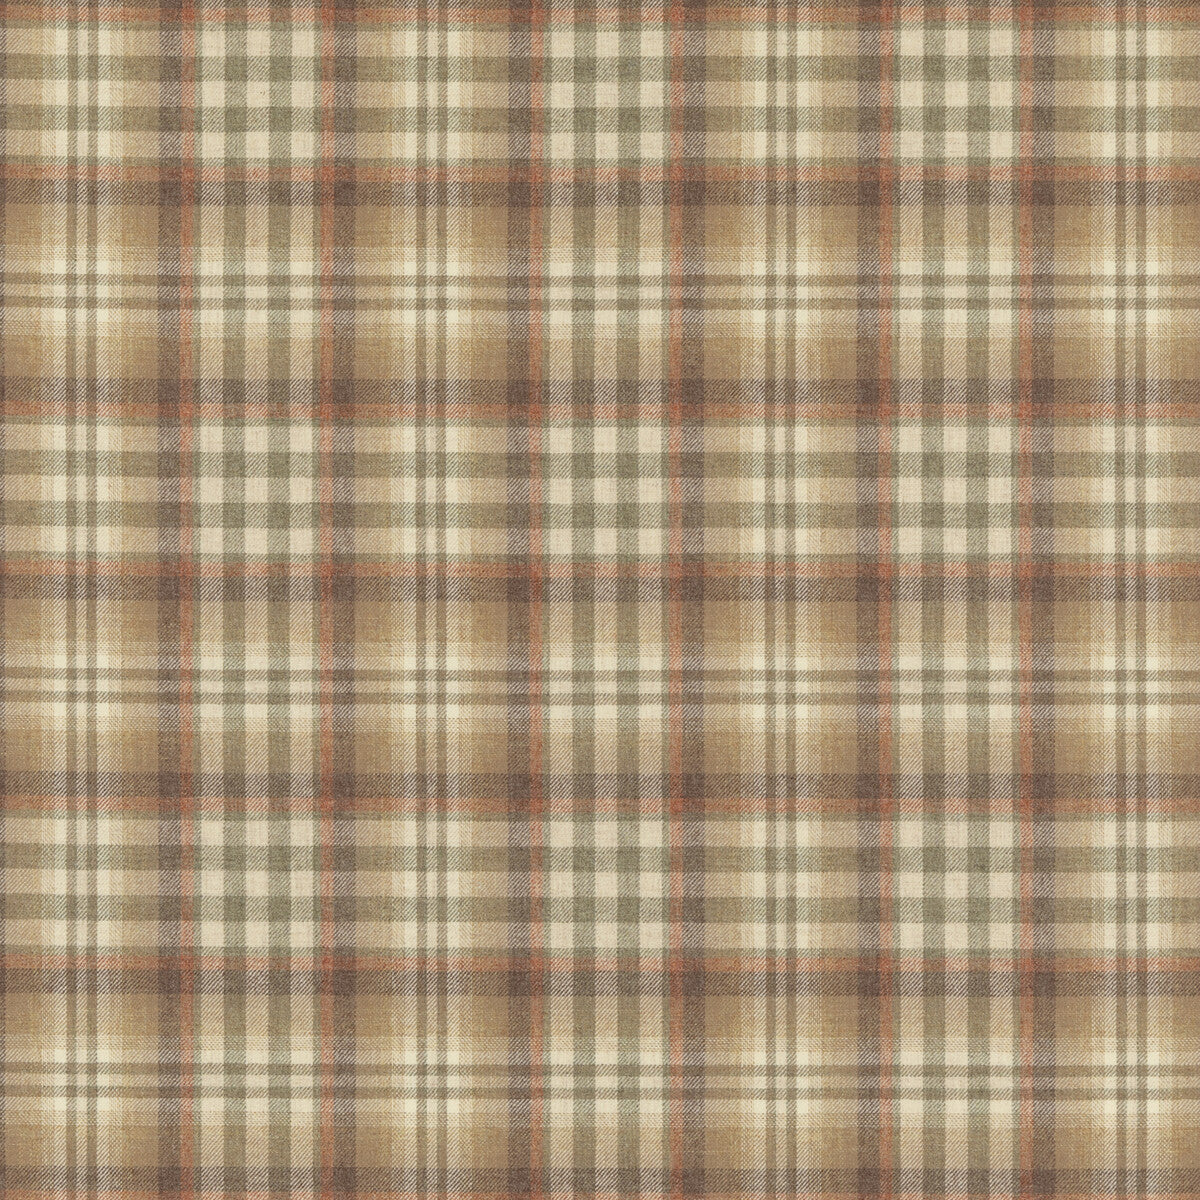 Nevis fabric in antique color - pattern FD748.J52.0 - by Mulberry in the Mulberry Wools IV collection